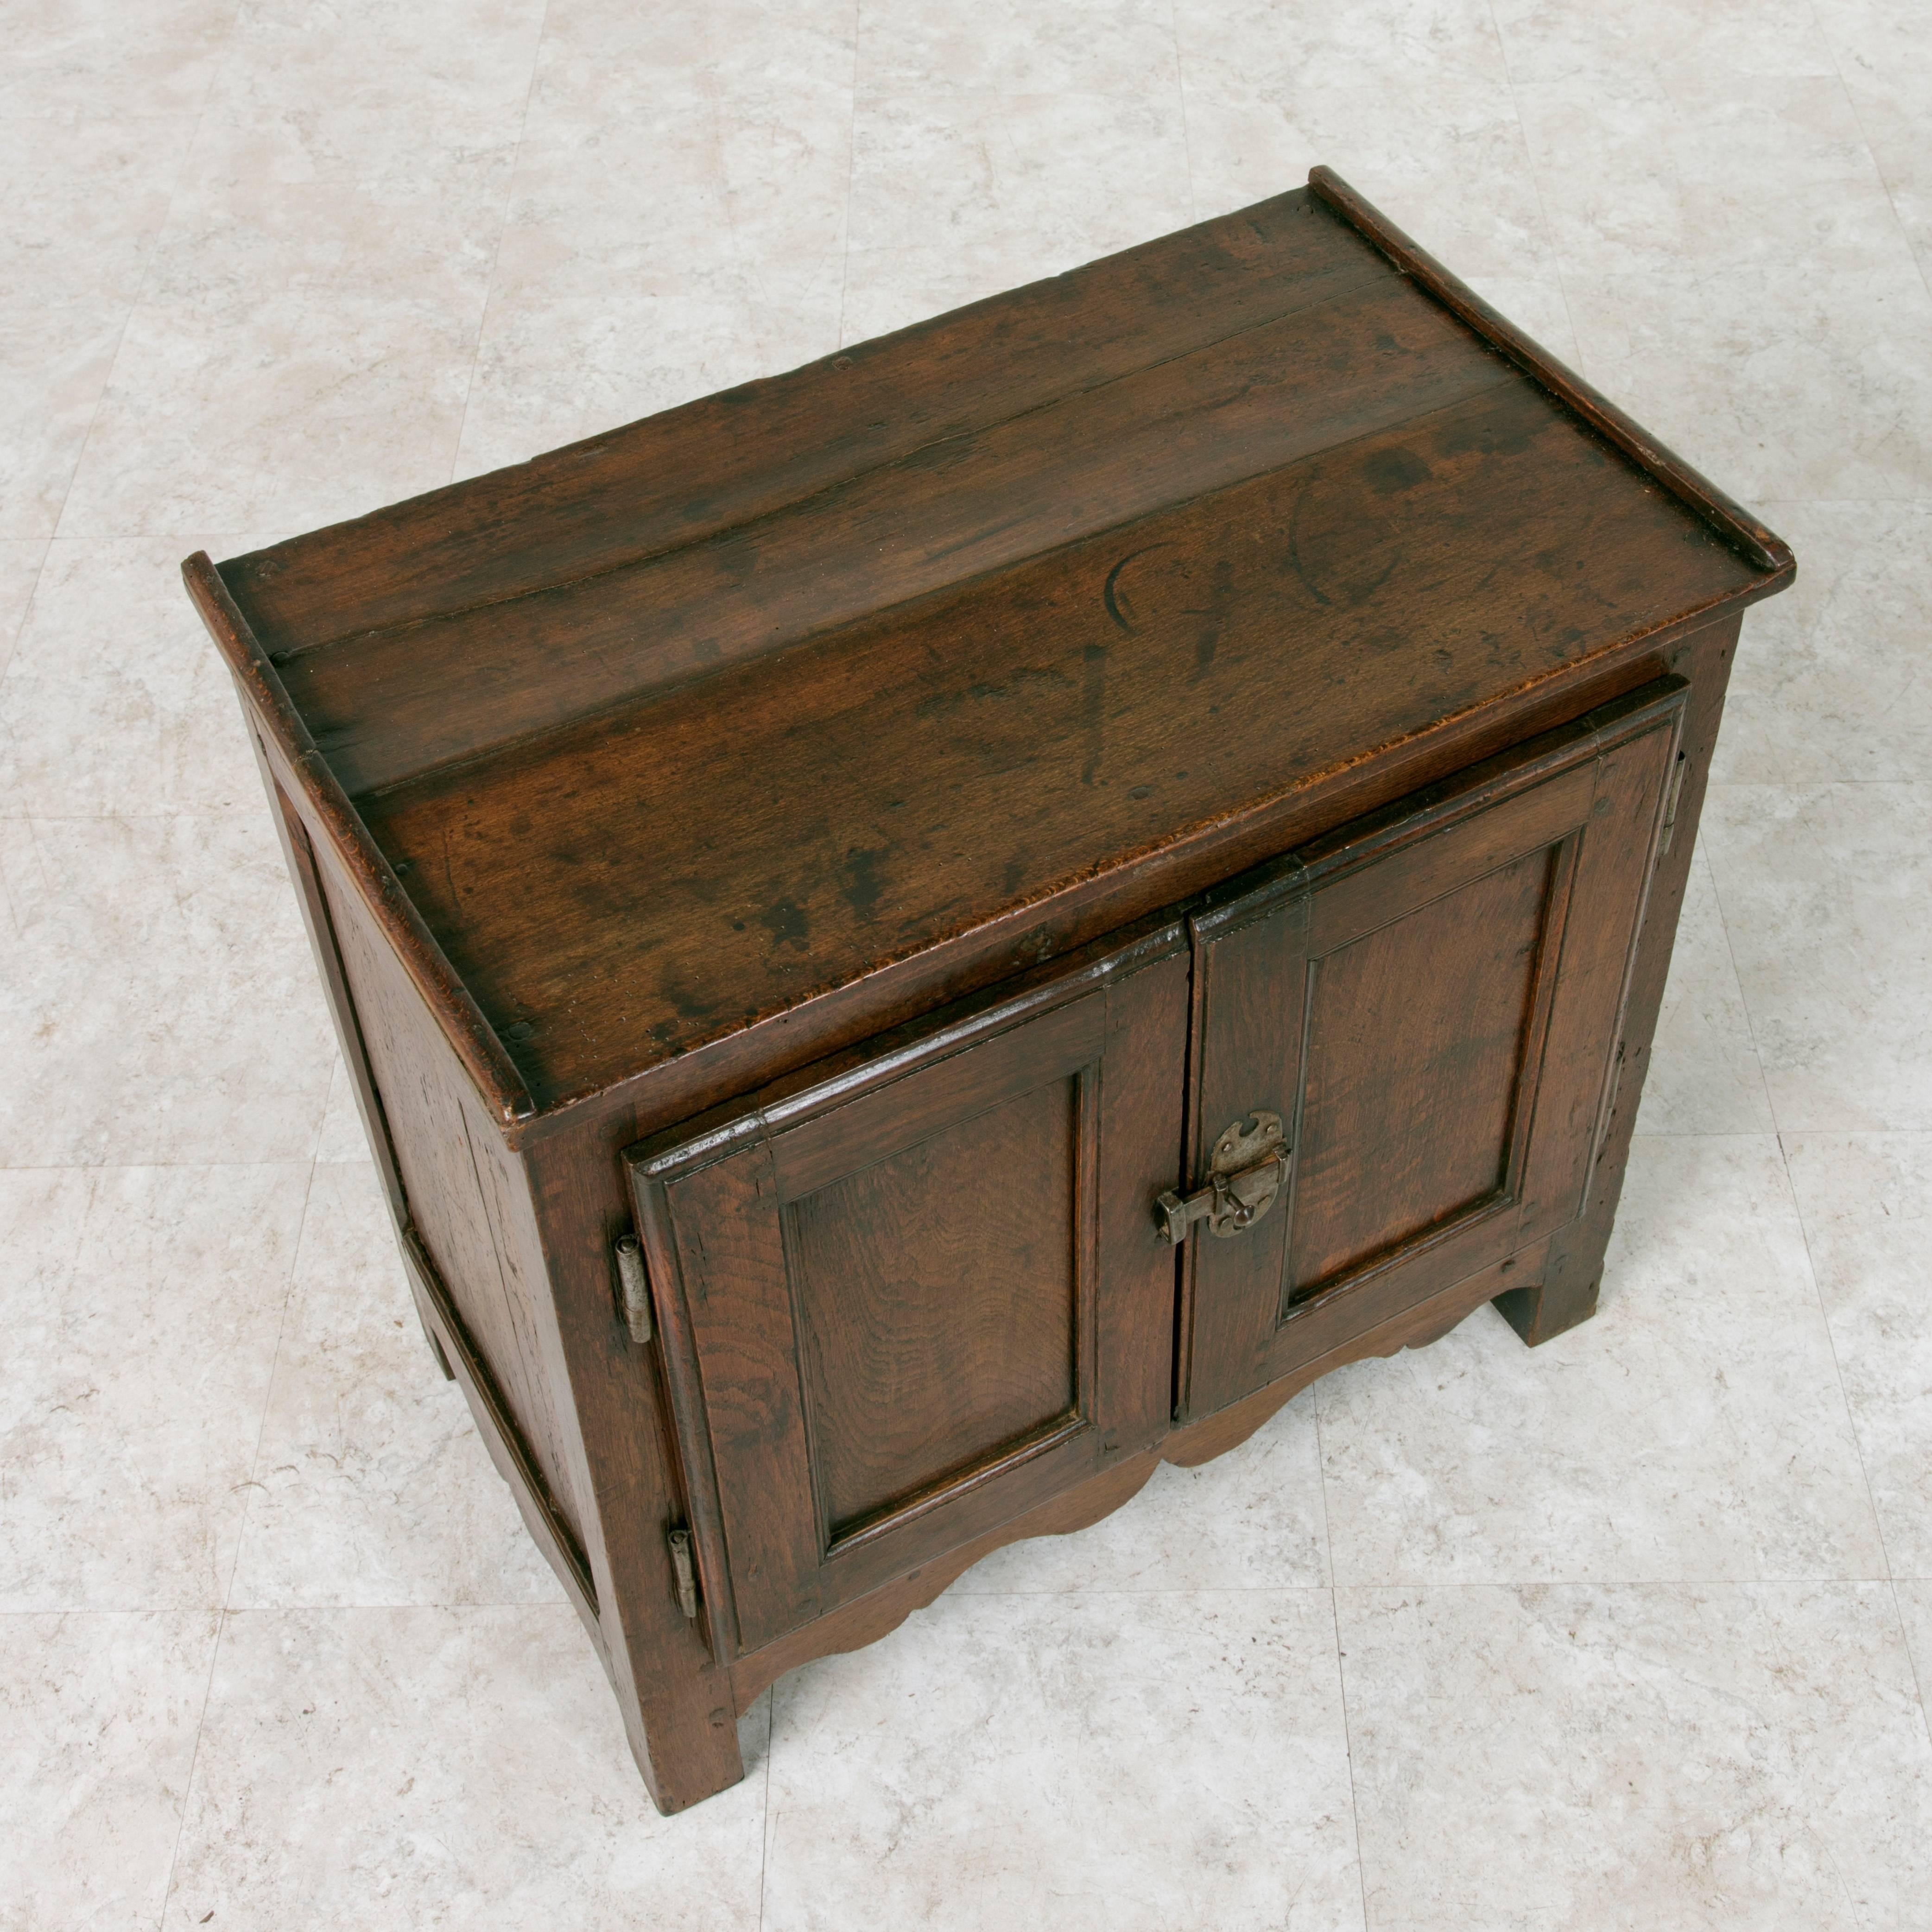 Originally from the region of Normandy, France, this petite 18th century artisan-made walnut cabinet features double doors that close with an iron latch, is complementing its iron hinges. The interior cabinet has a single shelf. This sturdy piece of